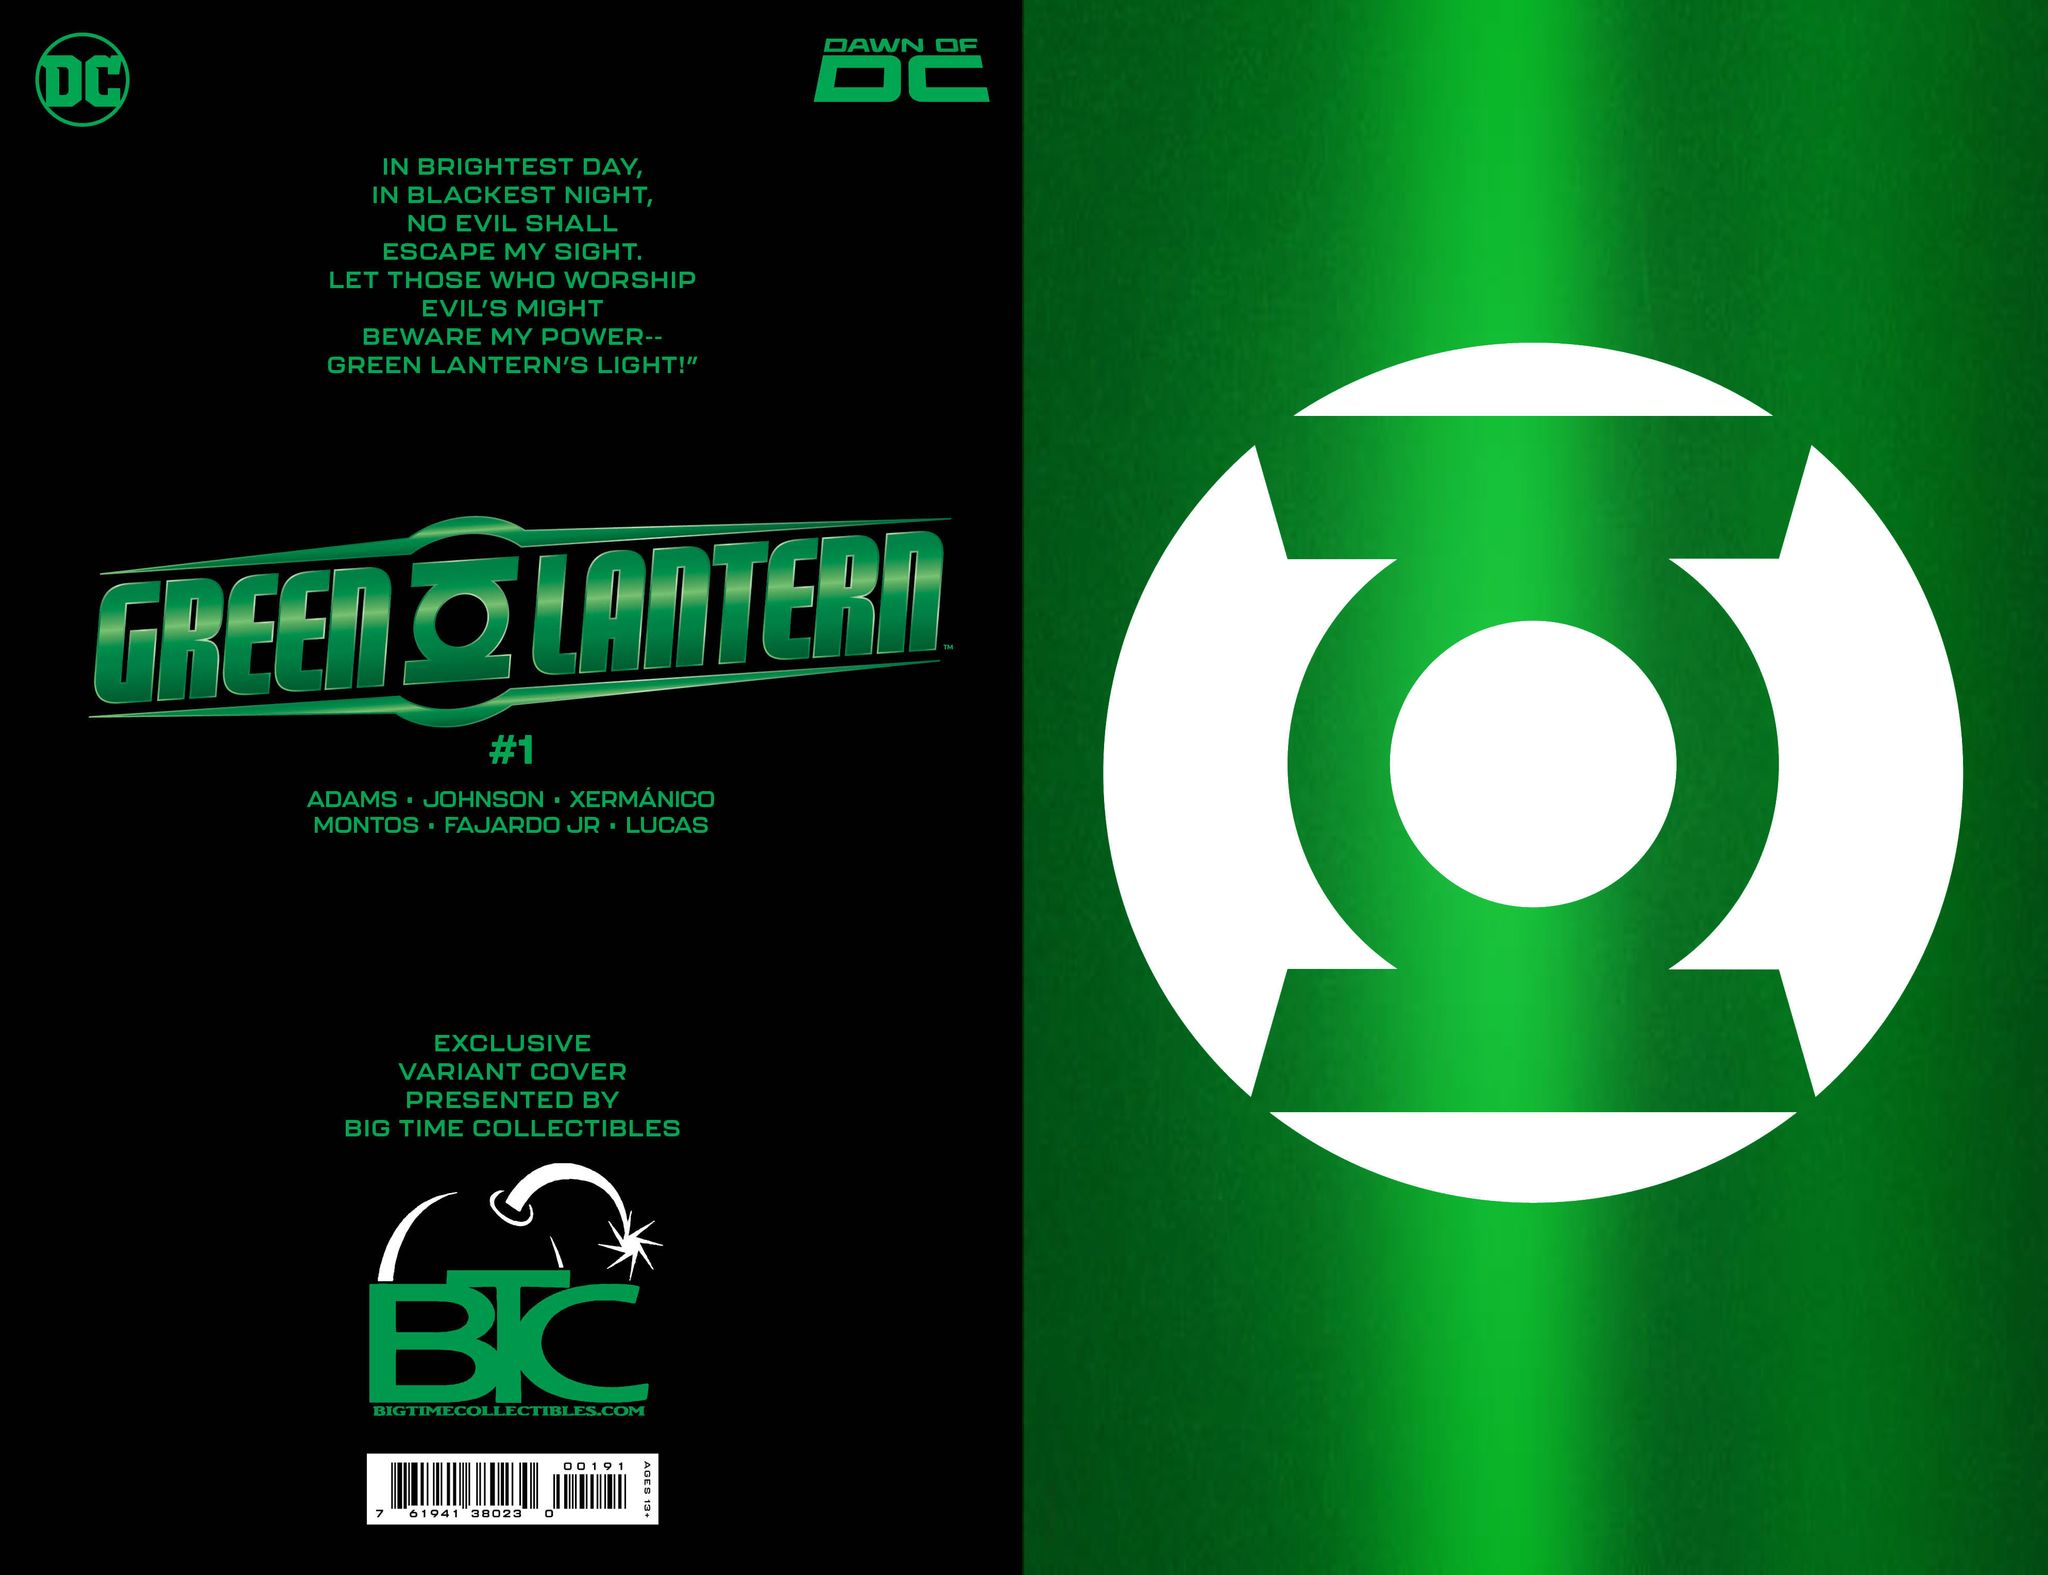 GREEN LANTERN #1 BTC 9-PACK COLOR SPECTRUM BUNDLE RAW FOIL EDITION WITH FREE SET OF POWER RINGS - 5/9/2023